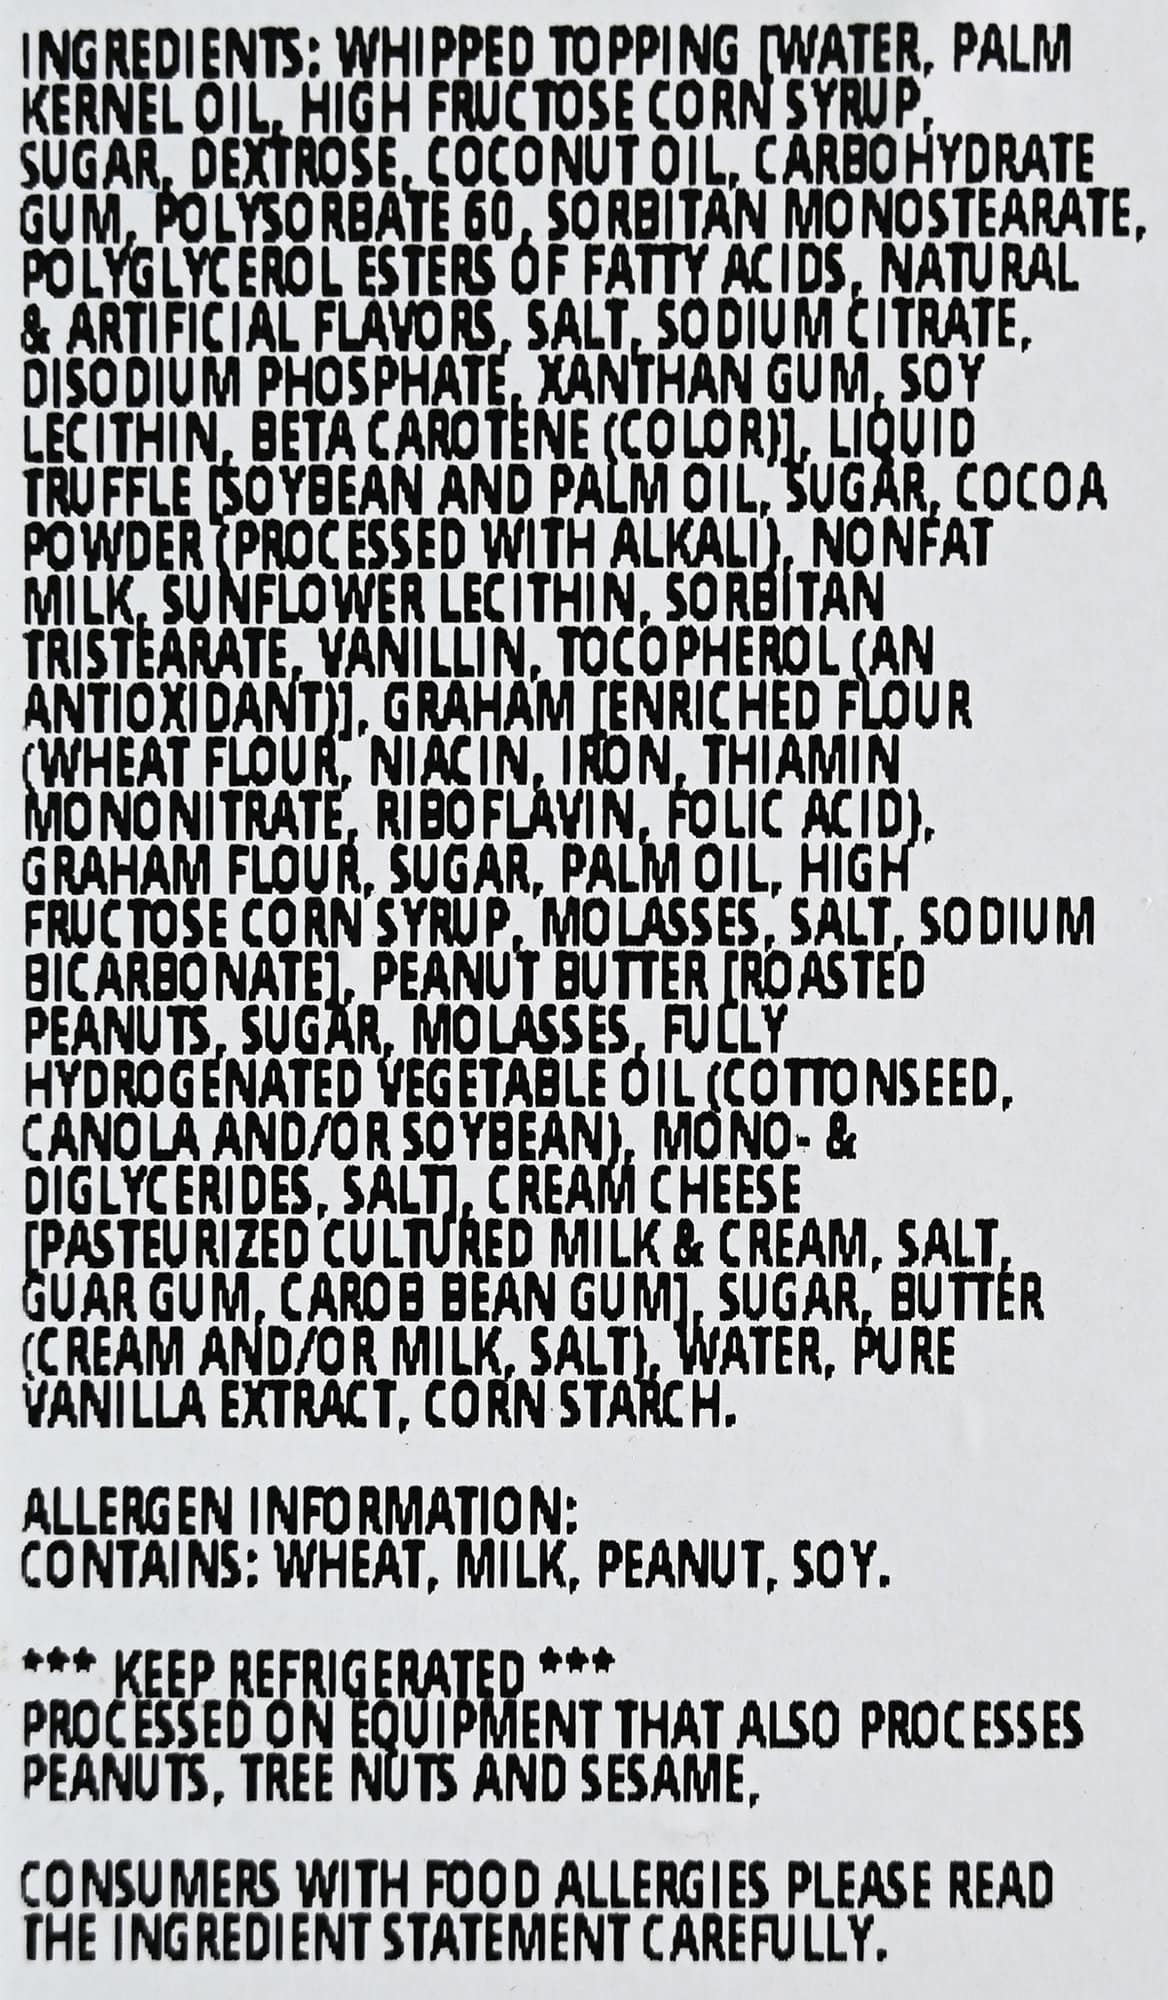 Image of the ingredients list for the pie from the packaging.